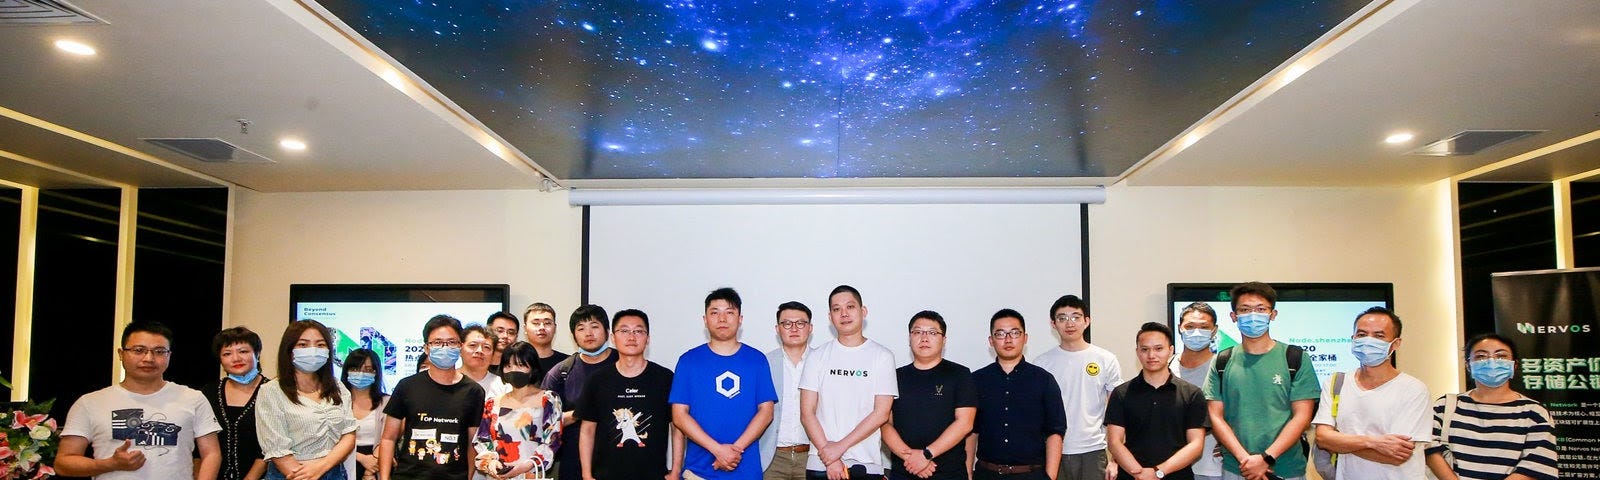 A picture of the attendees at Beyond Consensus in Shenzhen.